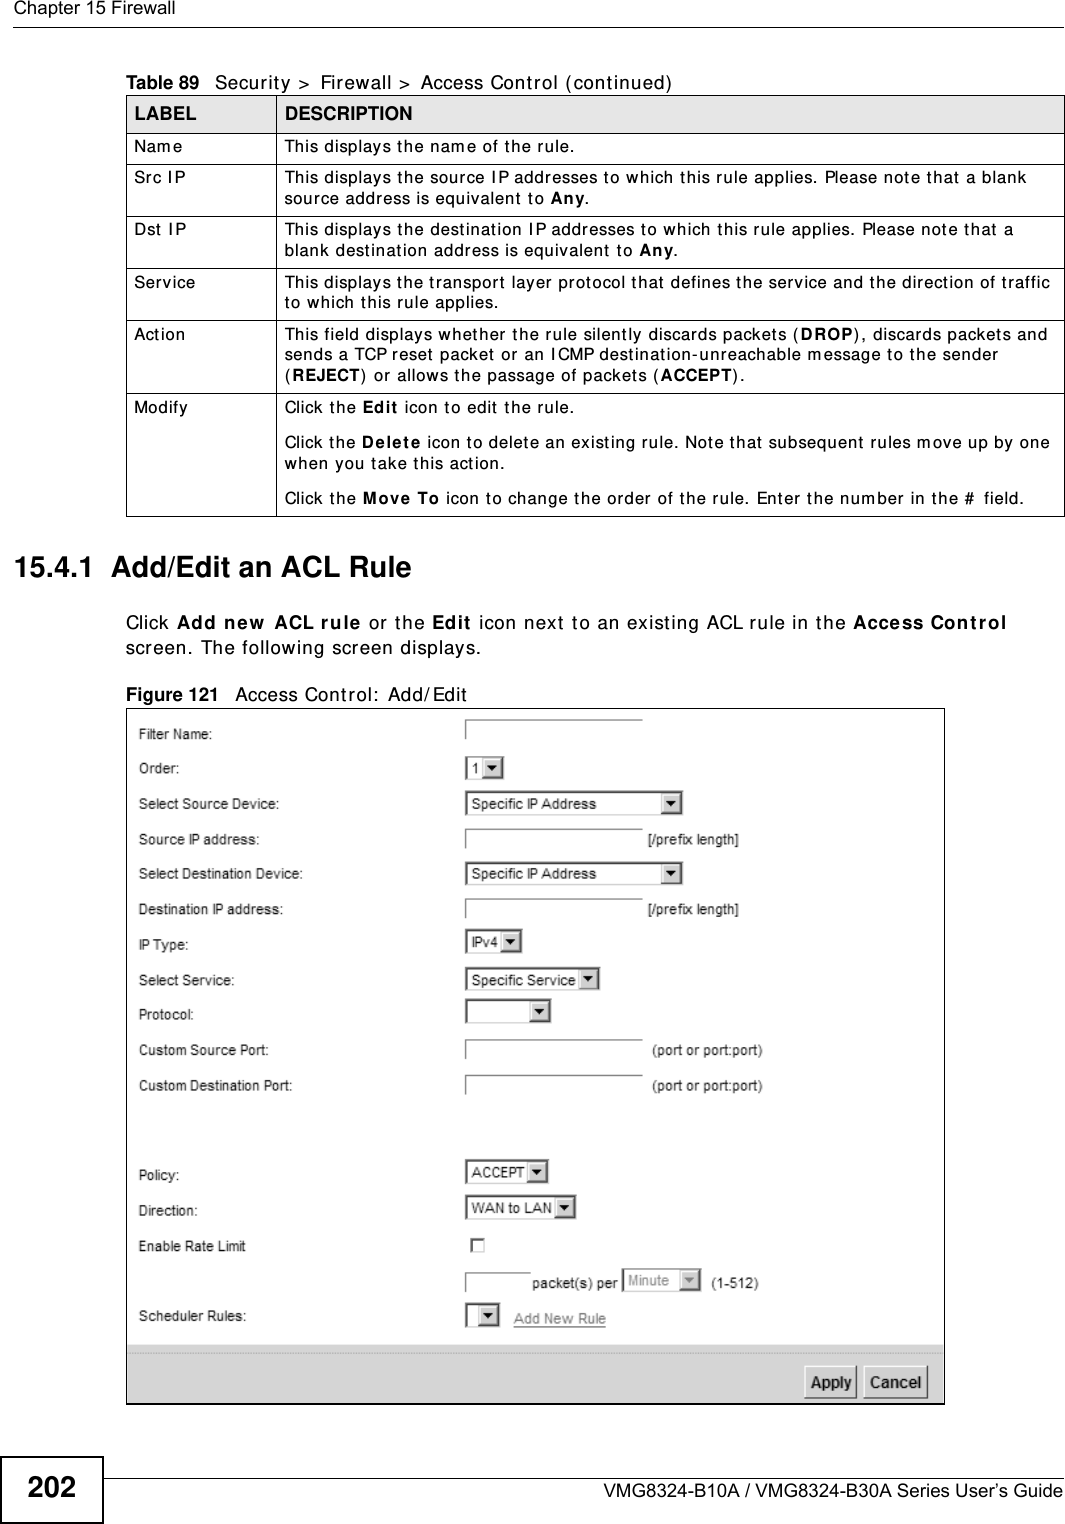 Chapter 15 FirewallVMG8324-B10A / VMG8324-B30A Series User’s Guide20215.4.1  Add/Edit an ACL Rule   Click Add new  ACL r u le  or t he Ed it  icon next  to an exist ing ACL rule in t he Access Con t r ol screen. The following screen displays.Figure 121   Access Cont rol:  Add/ EditNam e This displays t he nam e of t he rule.Src I P  This display s t he source I P addresses to which this rule applies. Please not e that a blank source address is equivalent  t o Any.Dst  I P This displays t he destinat ion I P addr esses t o w hich t his rule applies. Please not e t hat  a blank destinat ion address is equivalent  t o Any.Service This displays t he t ransport layer protocol t hat  defines the service and t he dir ection of t raffic to which this rule applies. Act ion This field displays whet her the rule silent ly discards packet s ( D ROP) , discards packet s and sends a TCP r eset  packet or an I CMP dest inat ion-unreachable m essage to t he sender (REJECT)  or allows t he passage of packet s ( ACCEPT) .Modify Click t he Ed it  icon t o edit the rule.Click the D ele t e icon  t o d elet e an ex ist ing r u le. Not e t hat  subsequ ent  r ules m ov e up  by  on e when you t ake t his act ion.Click the Move  To icon t o change the order  of t he rule.  Ent er t he num ber in t he #  field.Table 89   Securit y &gt;  Firewall &gt;  Access Cont r ol ( continued)LABEL DESCRIPTION